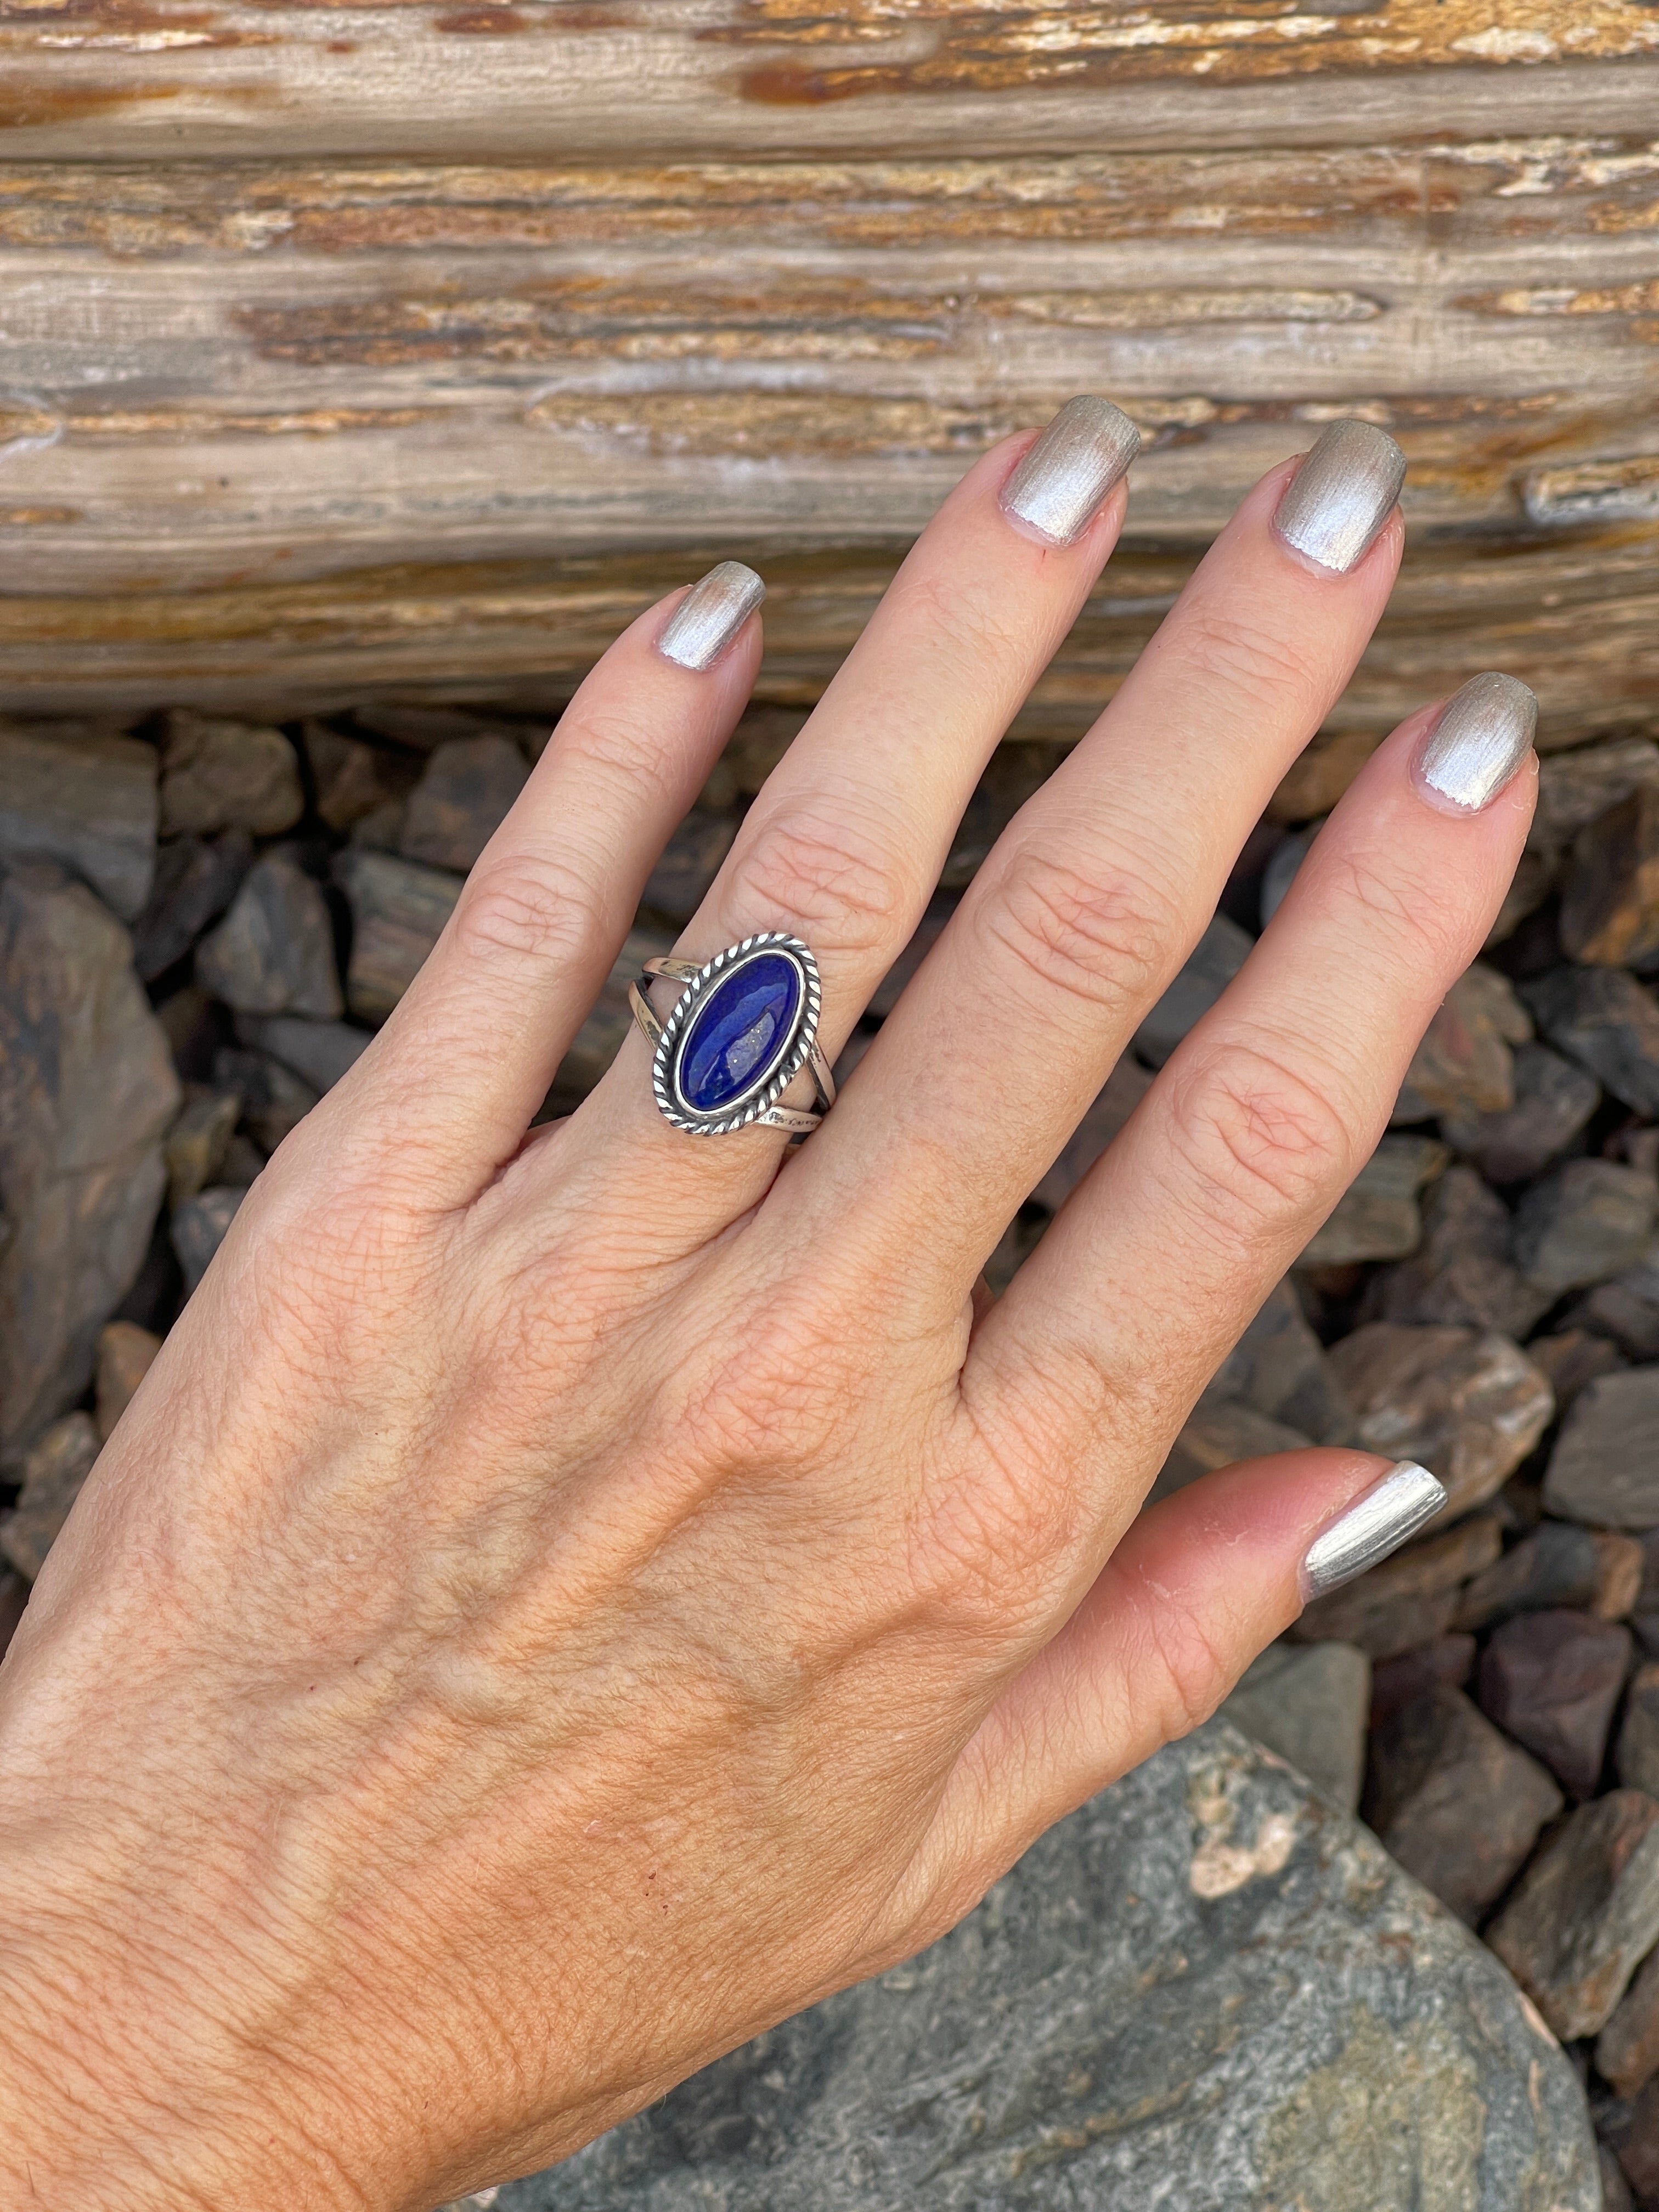 Handmade Solid Sterling Silver Blue Lapis Ring with Twist Trim - Size 6